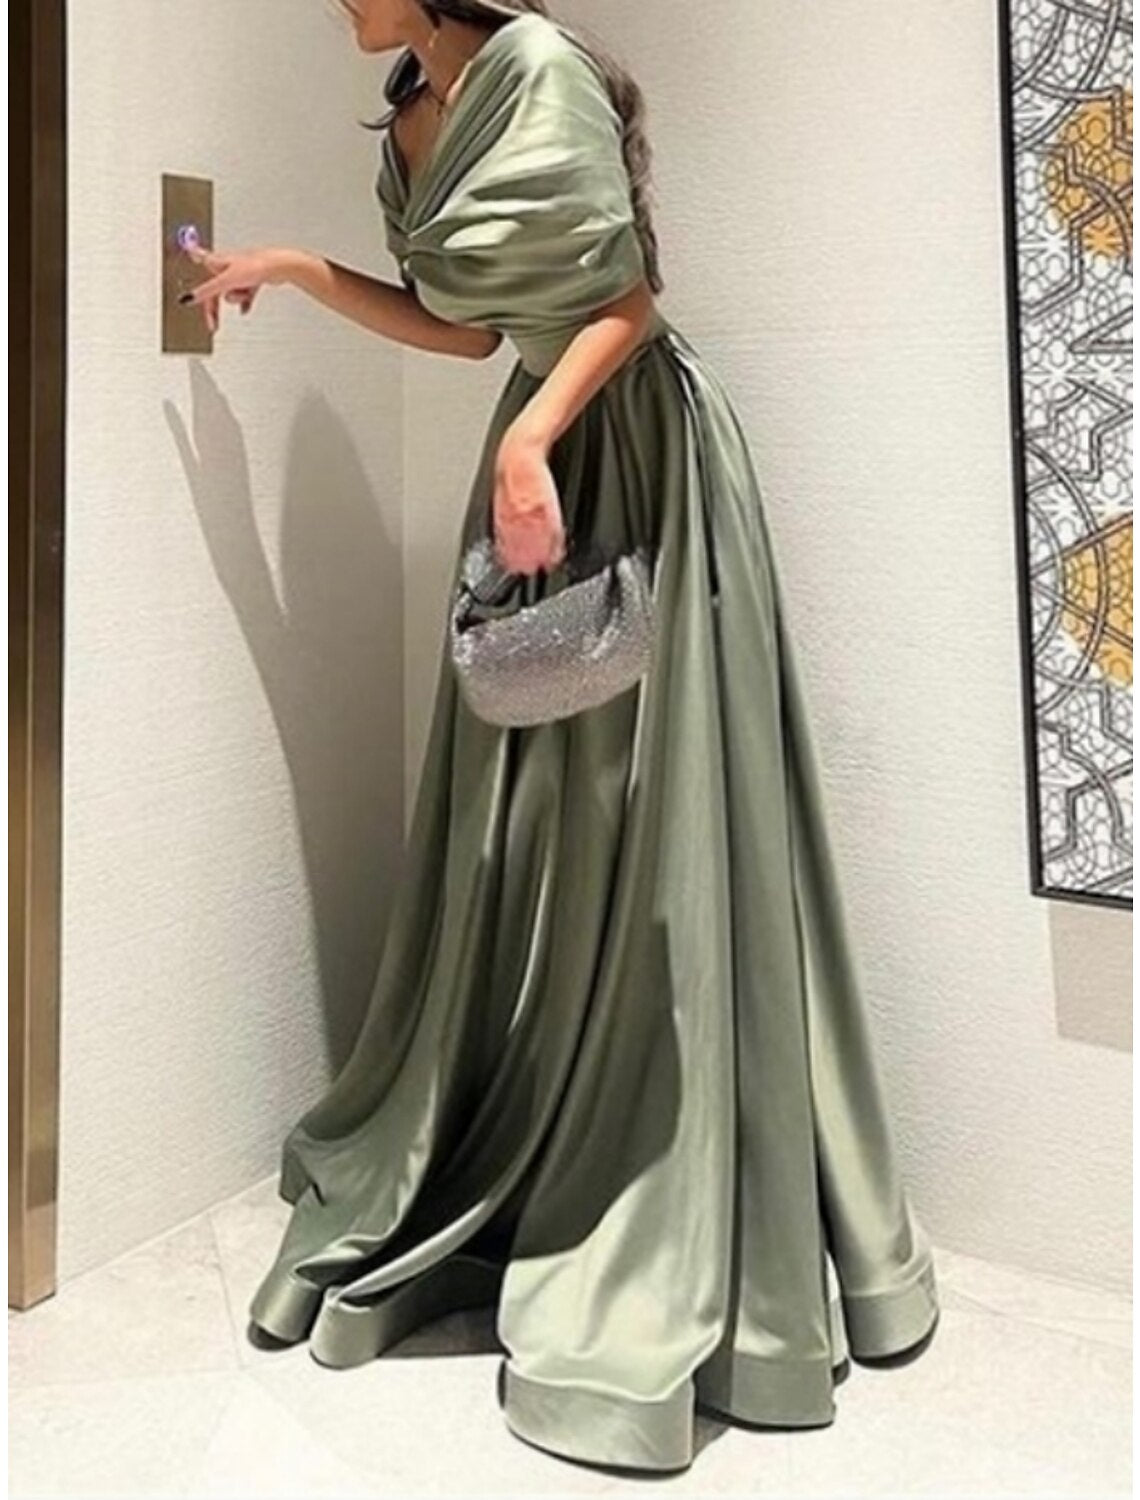 A-Line Evening Gown Elegant Dress Formal Floor Length Christmas Red Green Dress Short Sleeve Off Shoulder Satin with Pleats Ruched